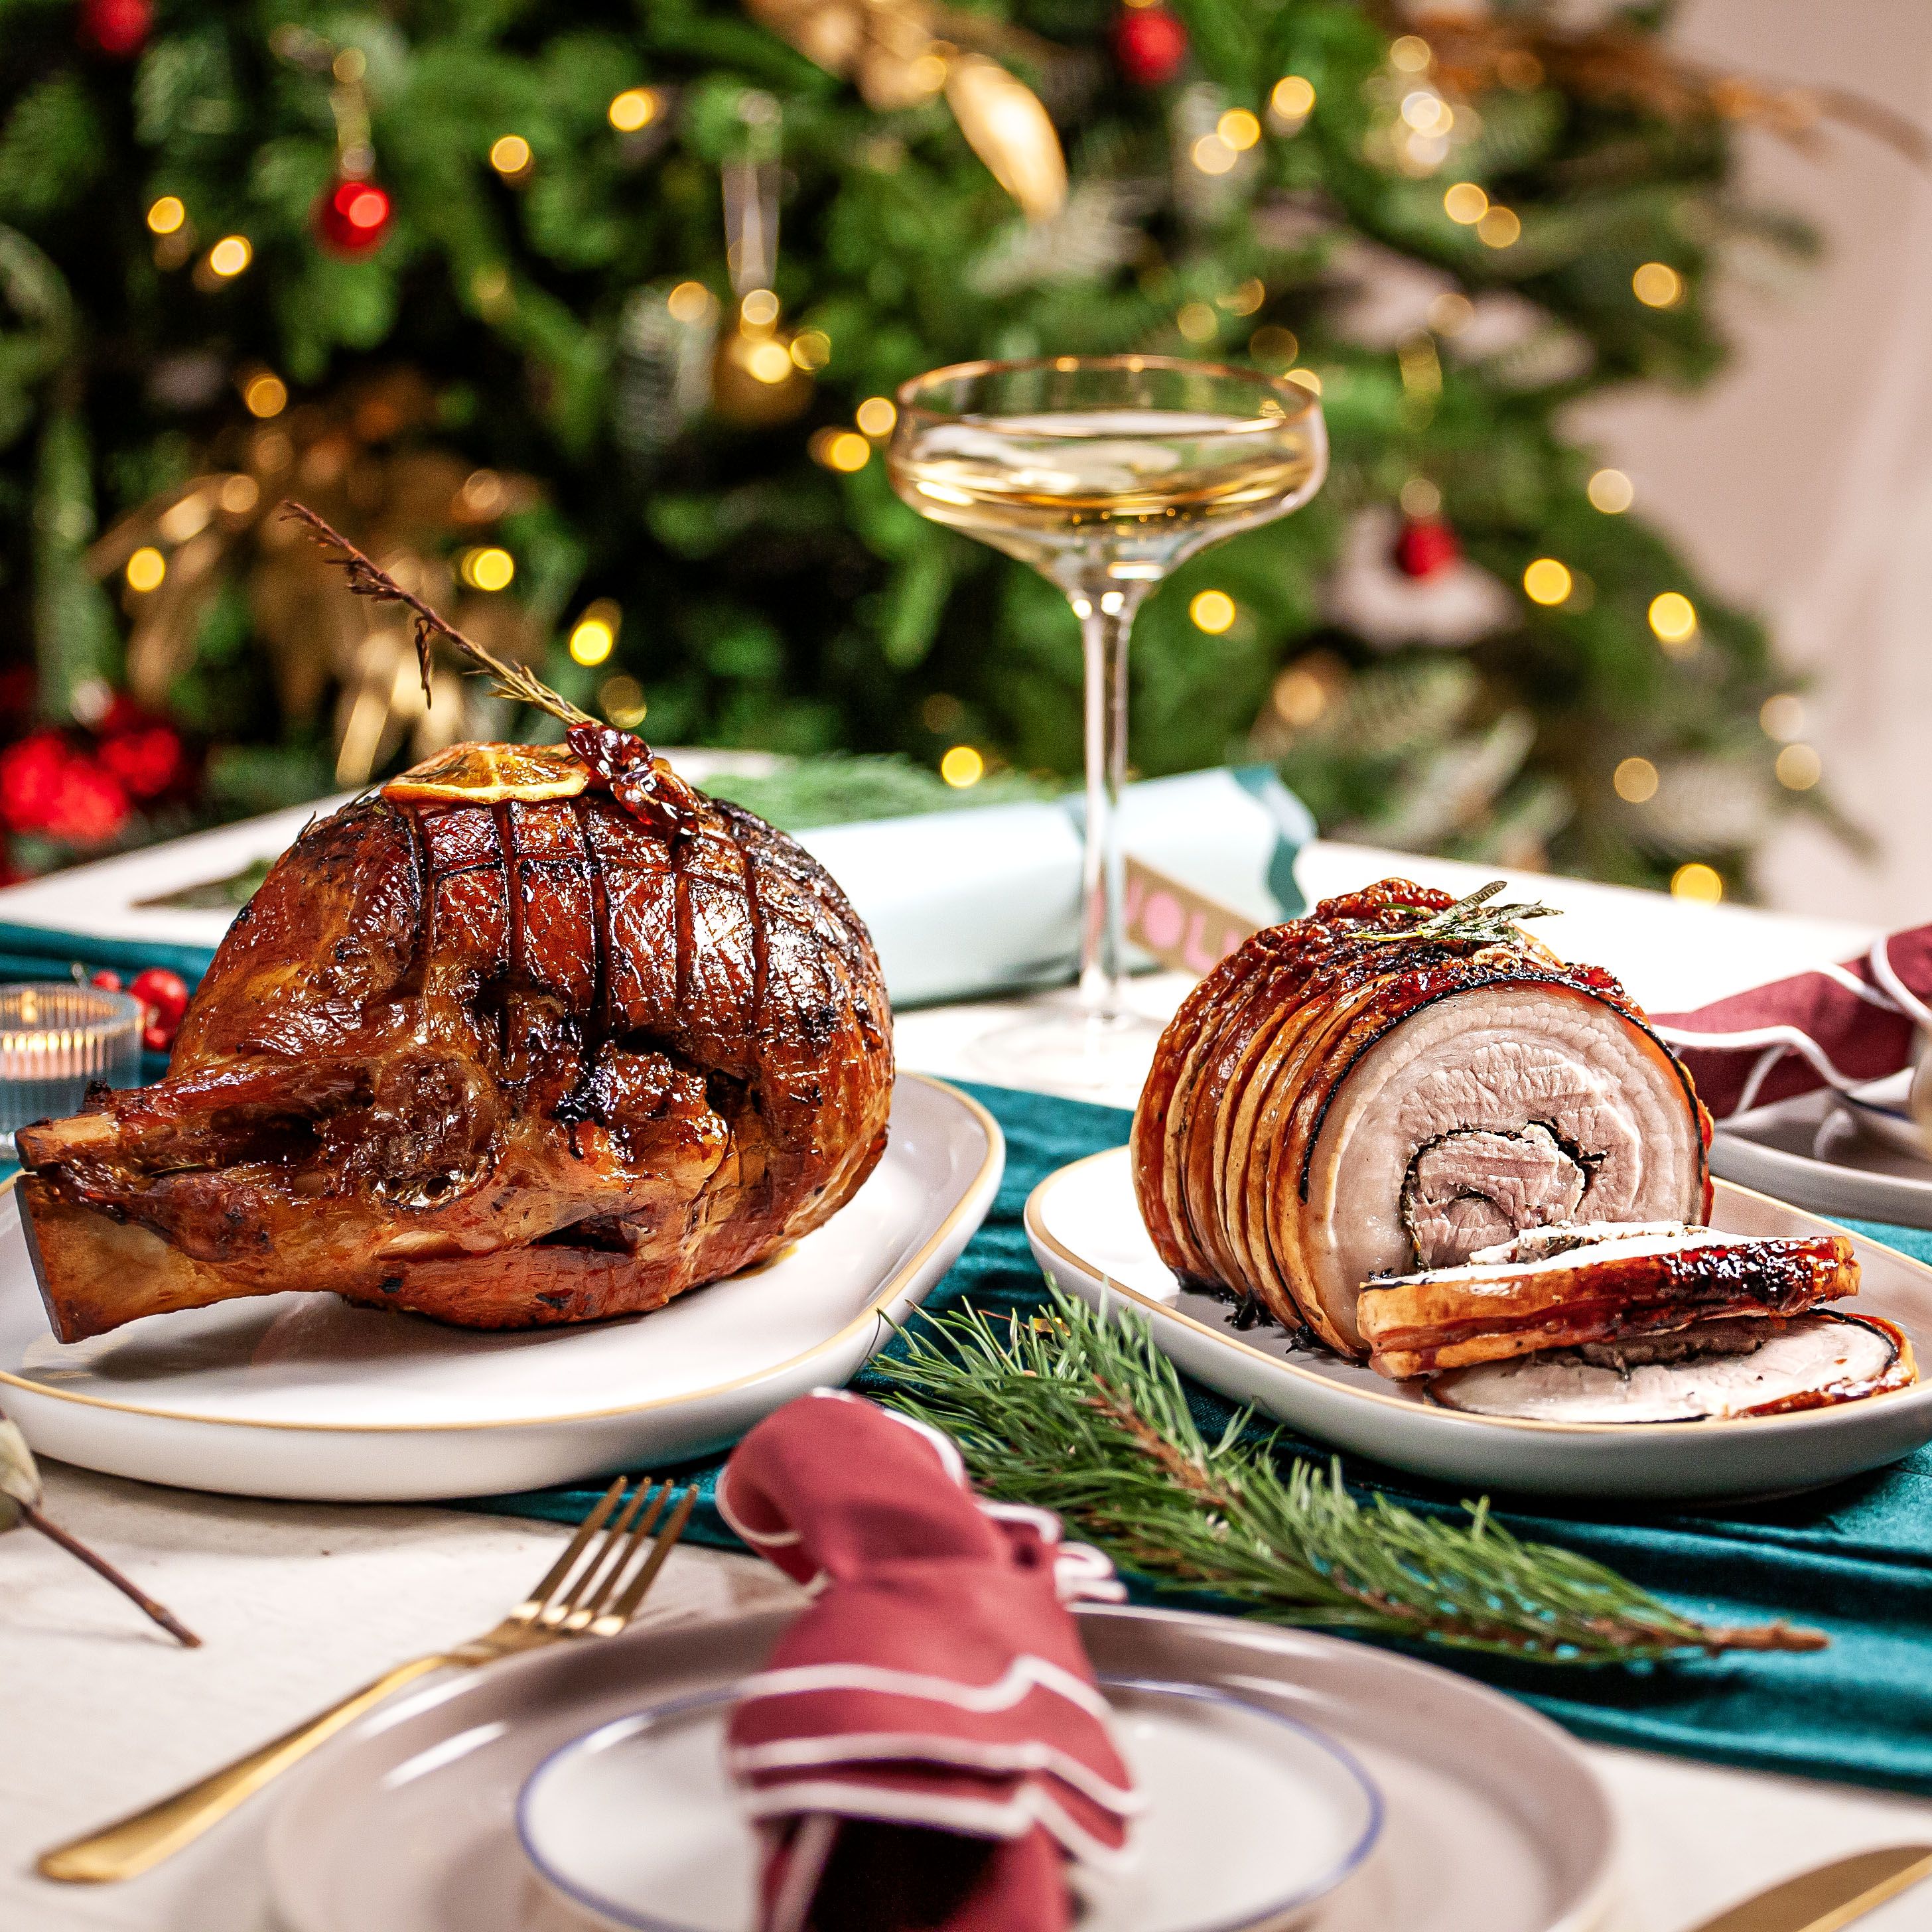 Best alternative Christmas dinners. Best roasts and meat mains for